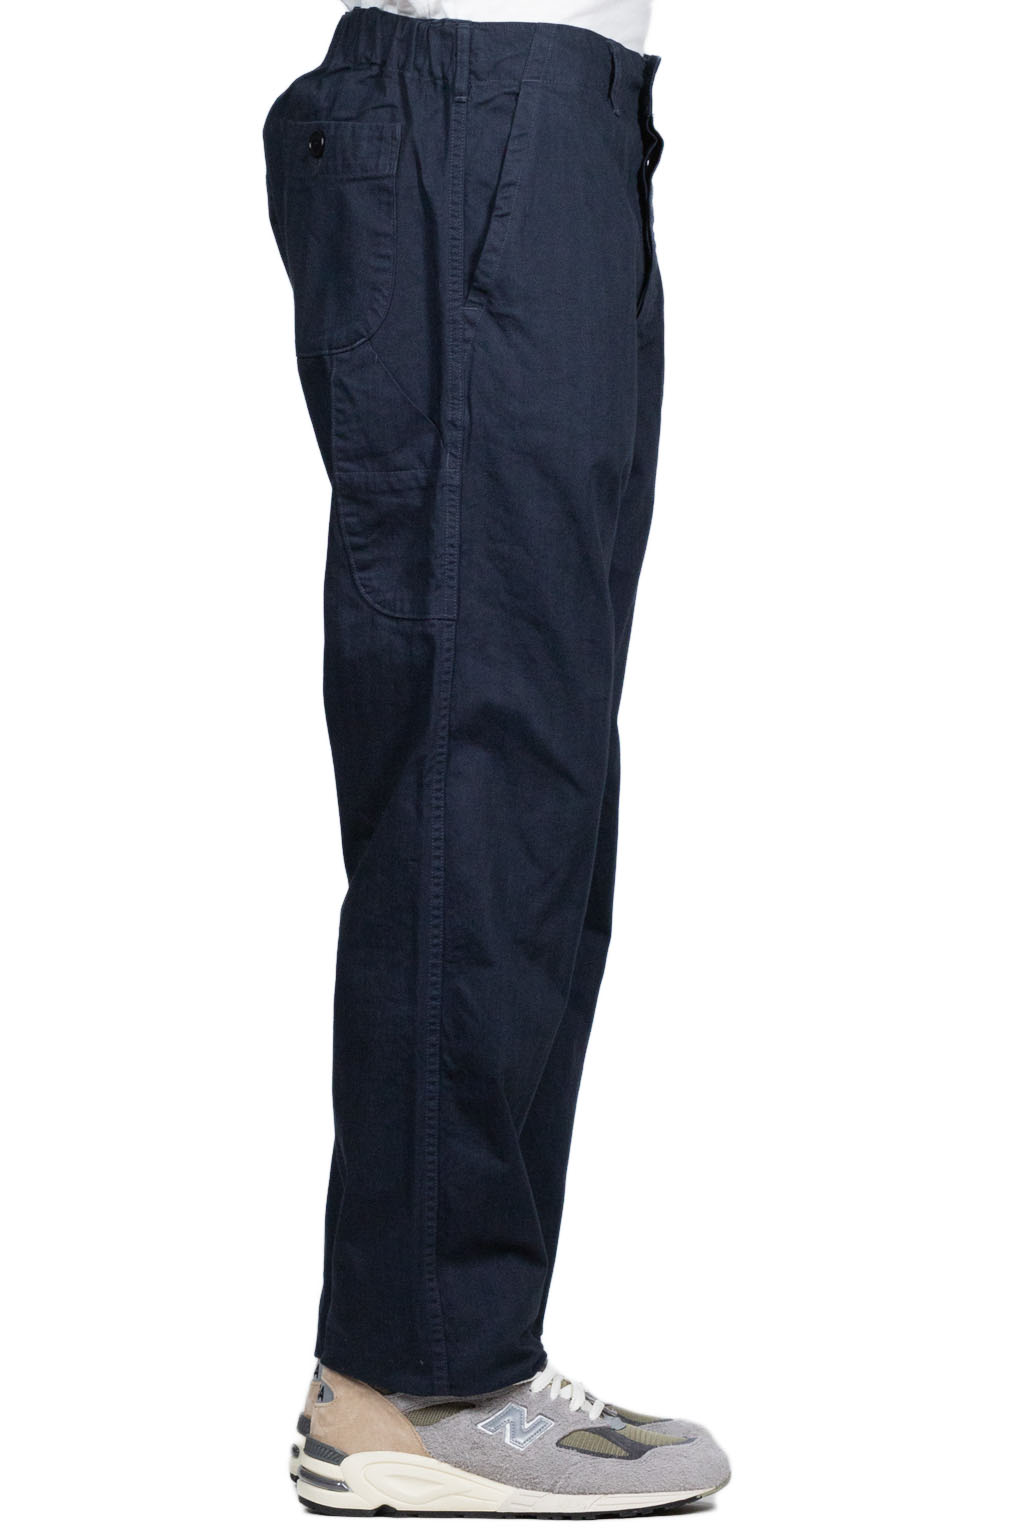 OrSlow French Work Pants - Navy